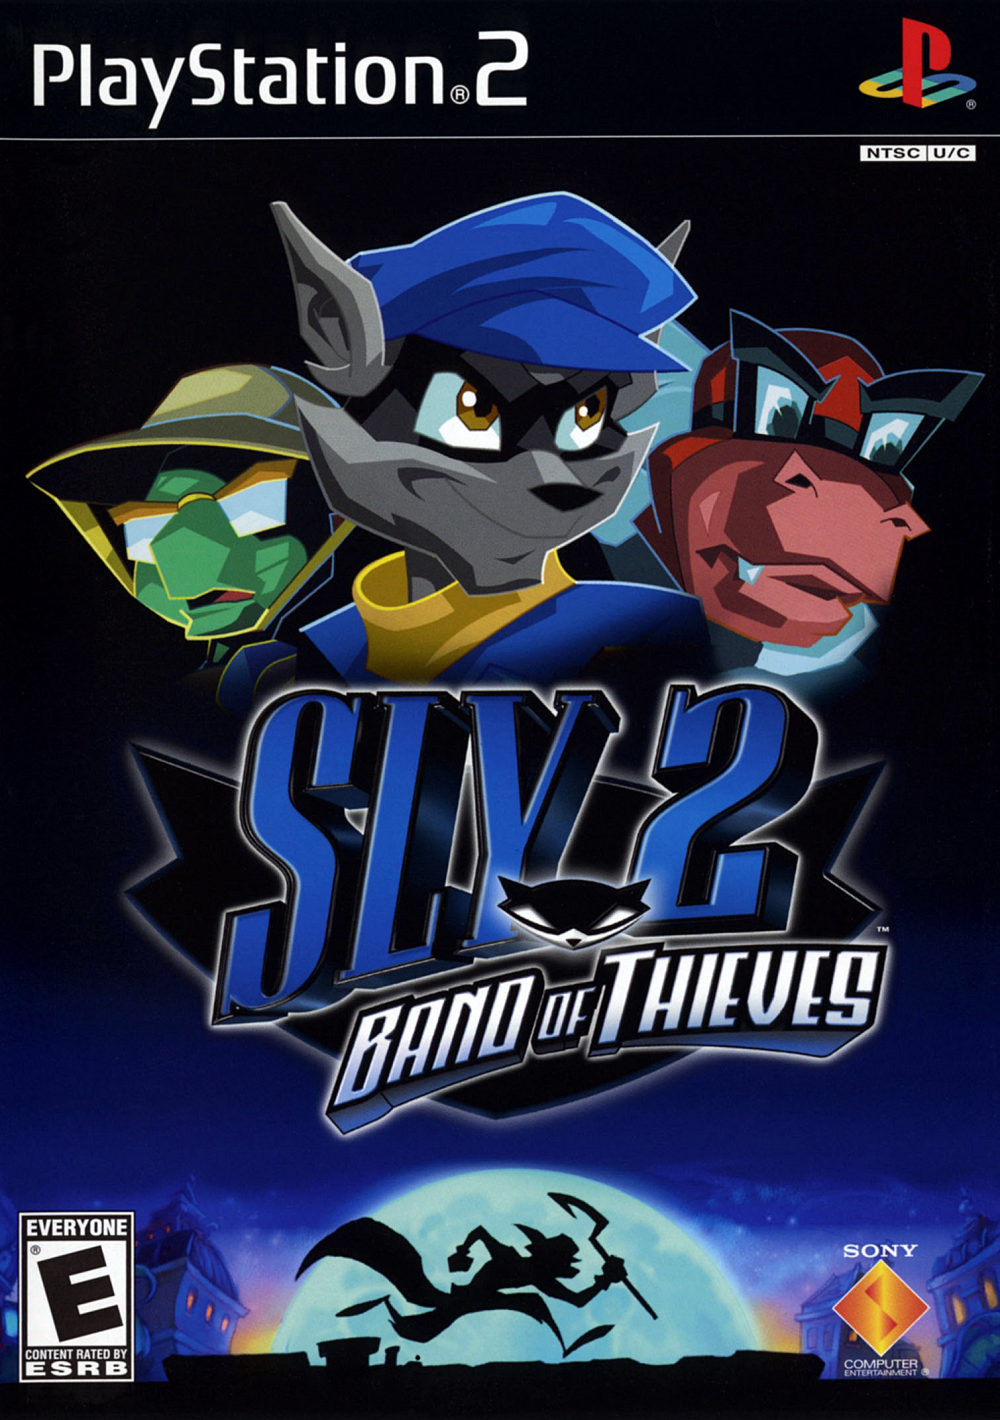 PS2 Sly Cooper SlyCooper Sly Cooper Japan PlayStation 2